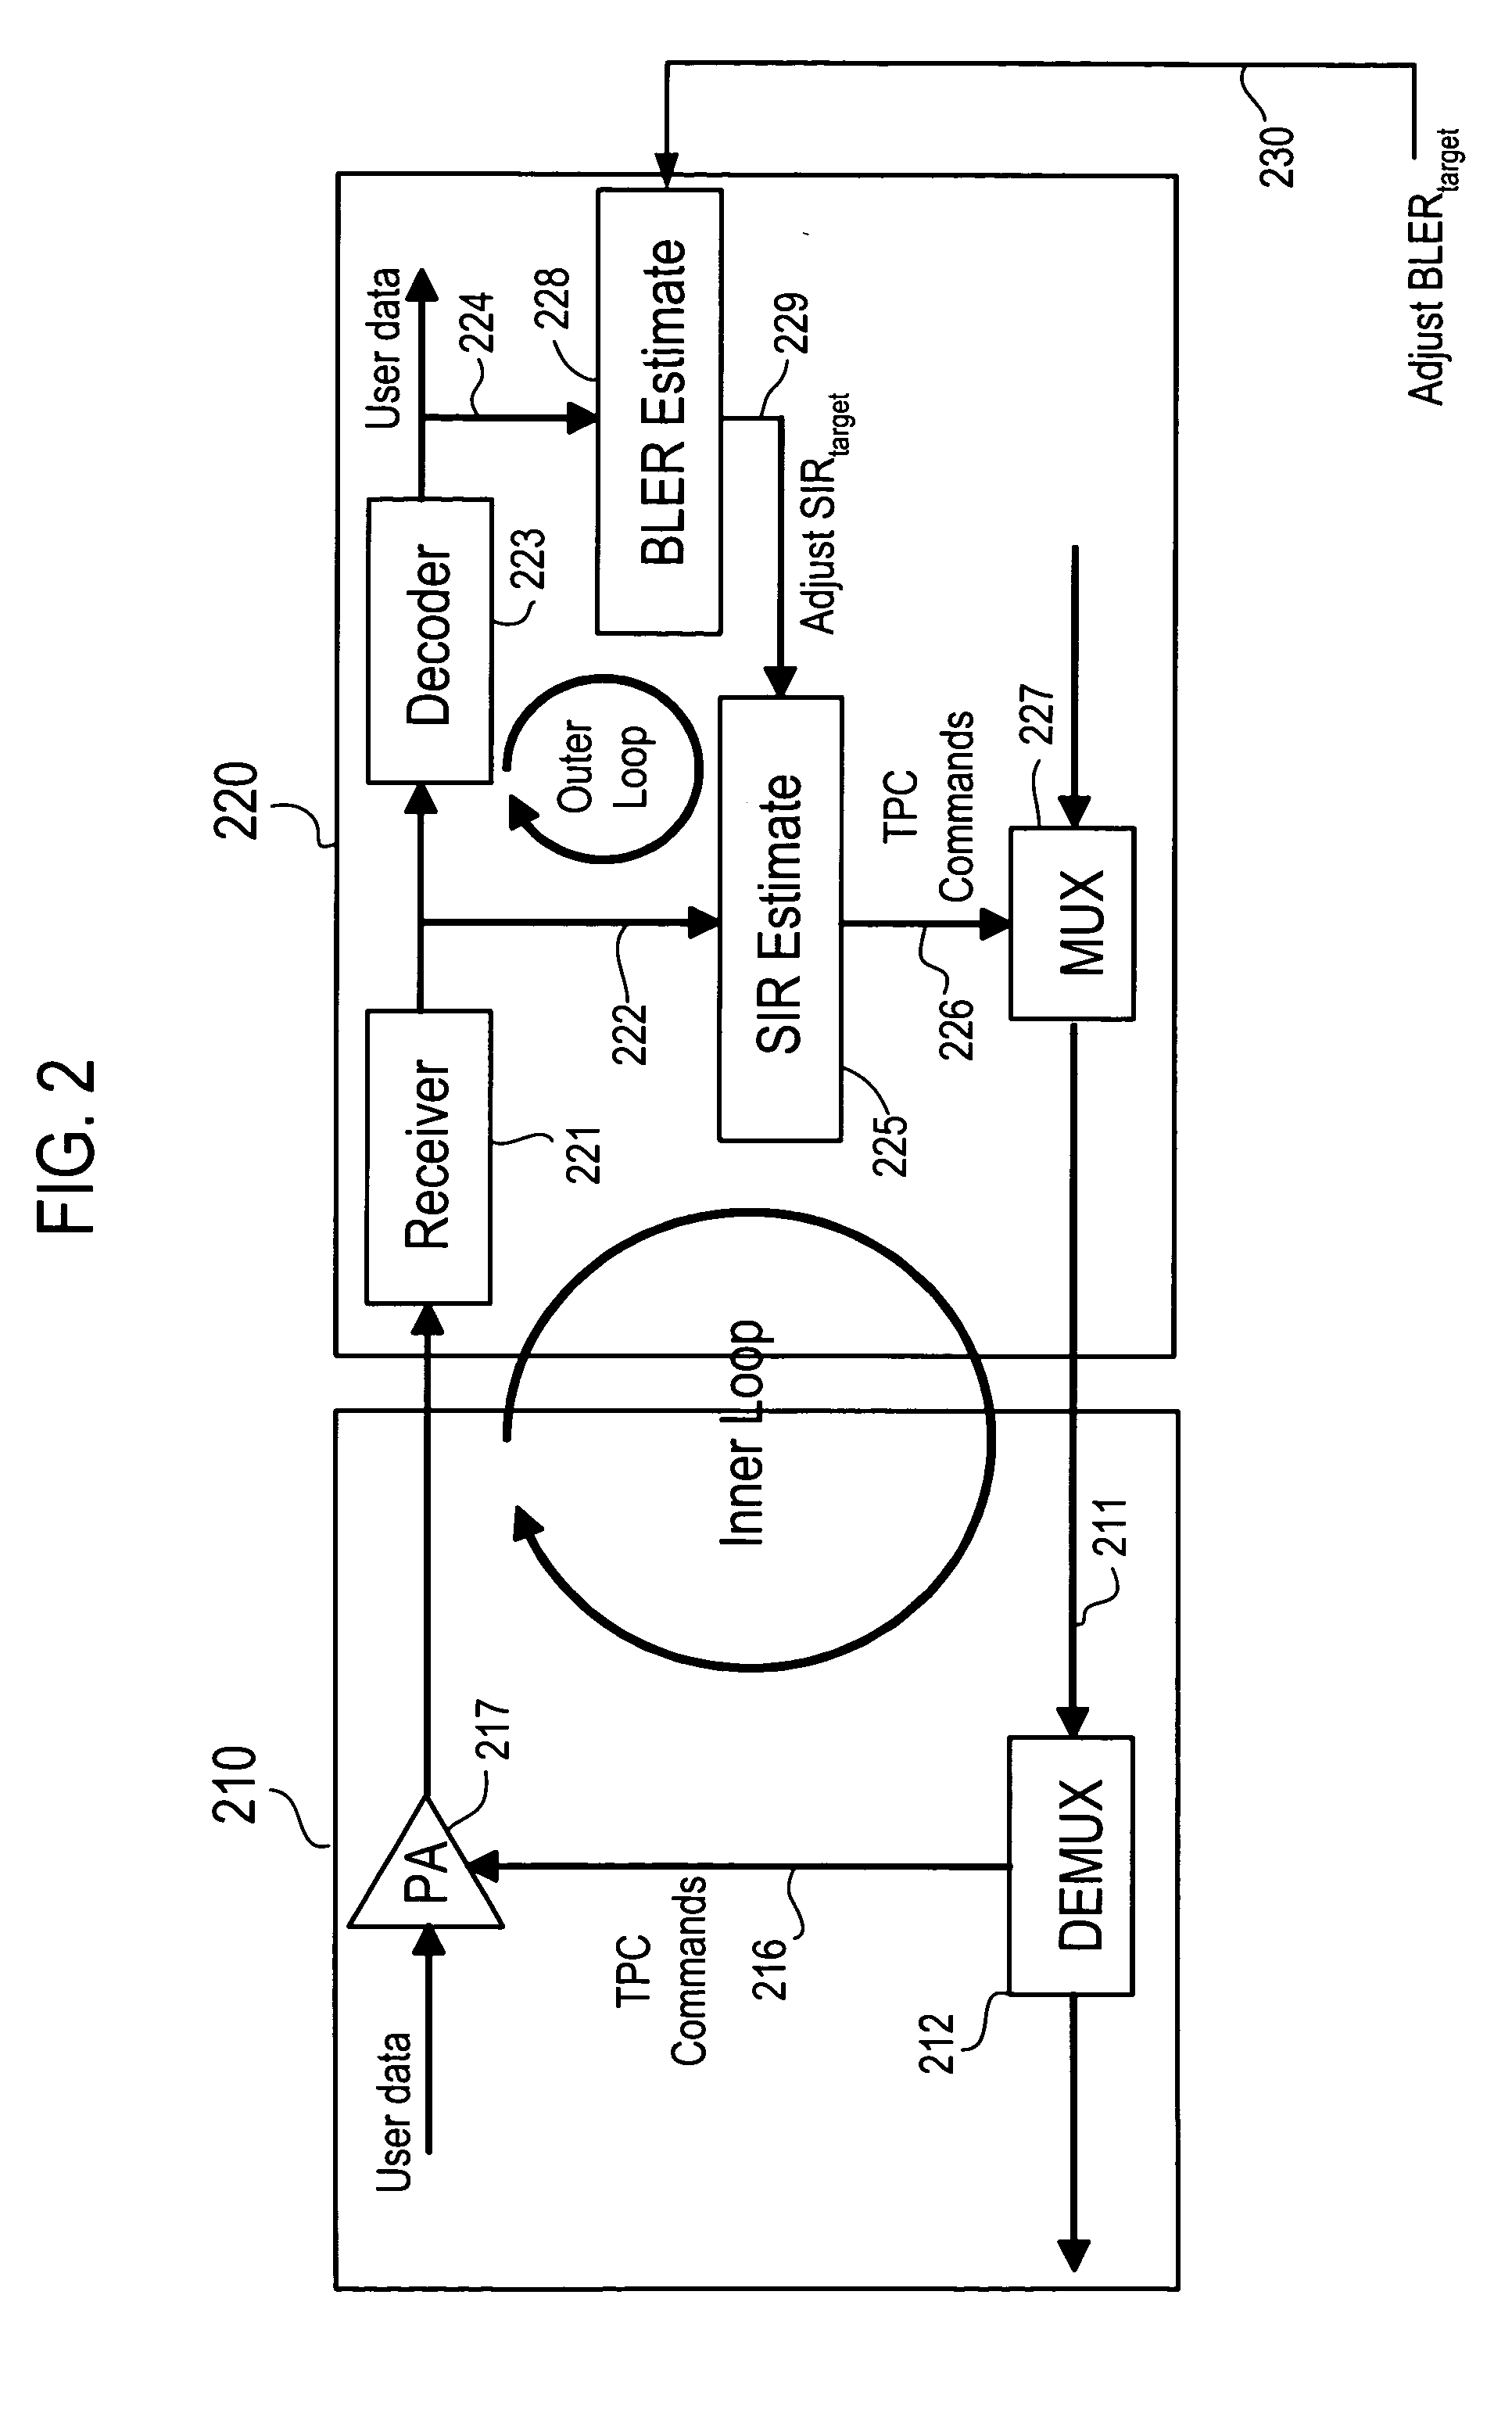 Methods of power overload control in communication systems